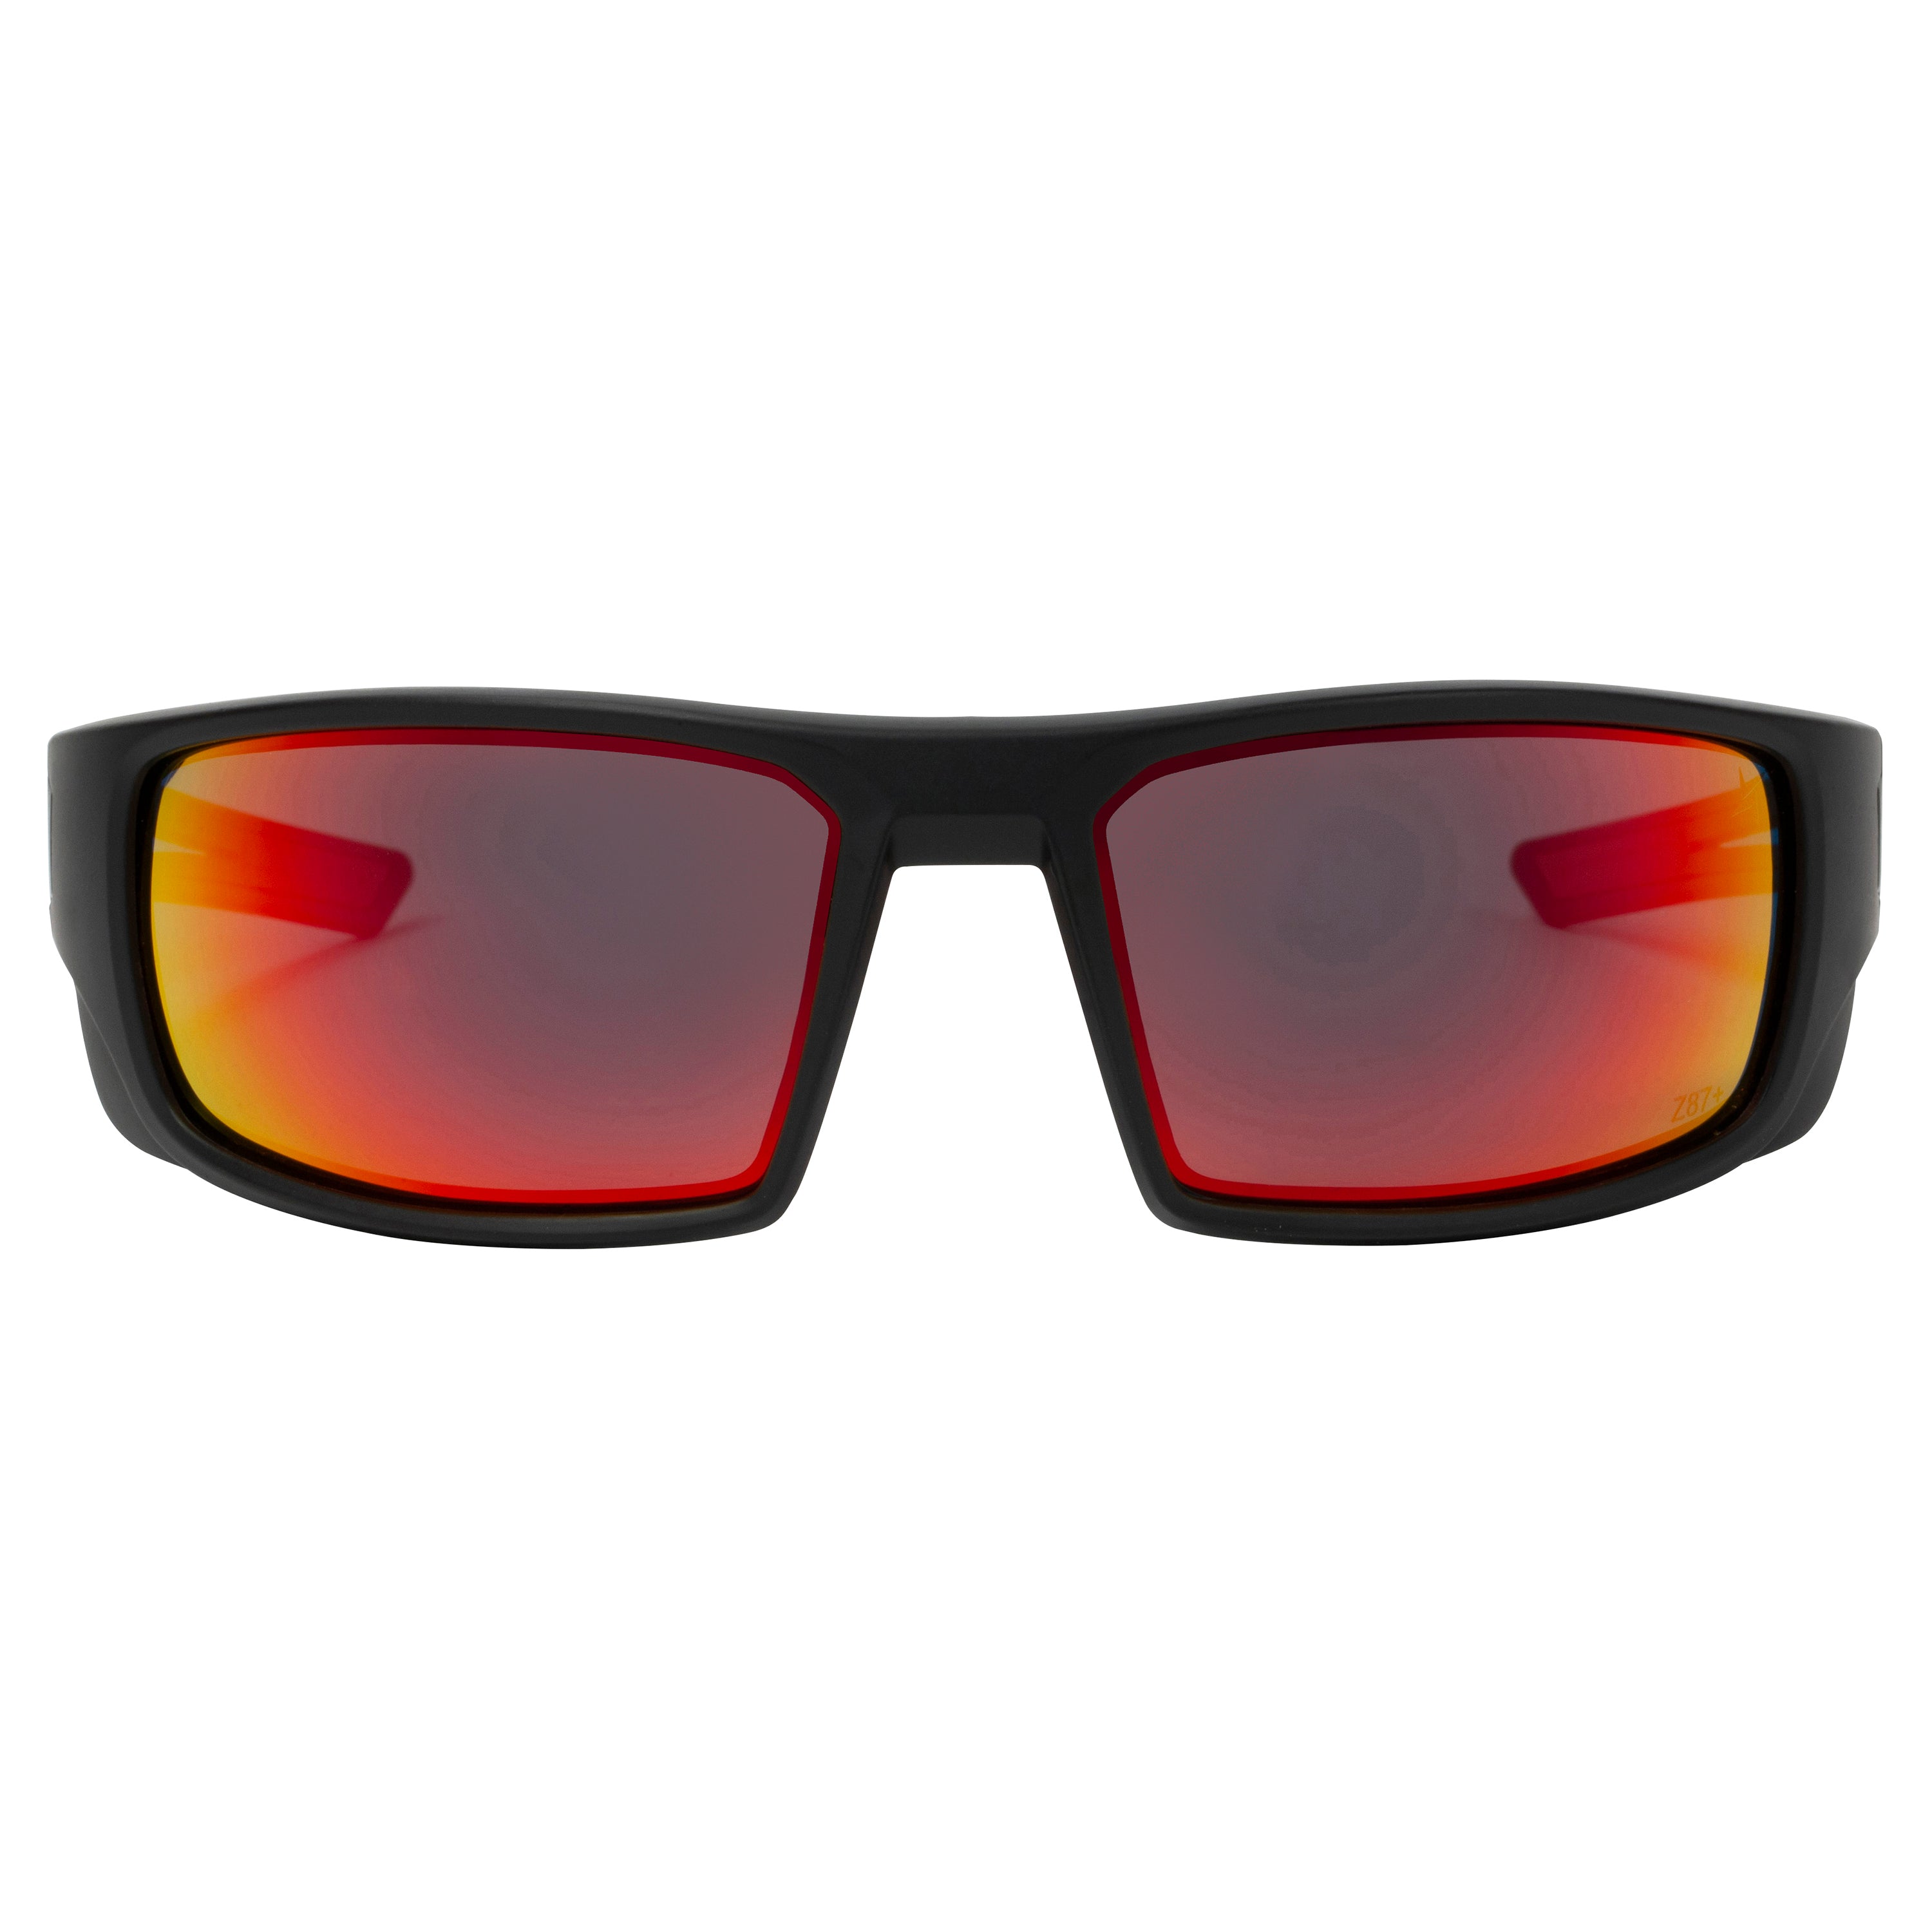 Polycarbonate Polarized Red Mirror Lens Sport Safety Glasses with Red Rubber Accents.